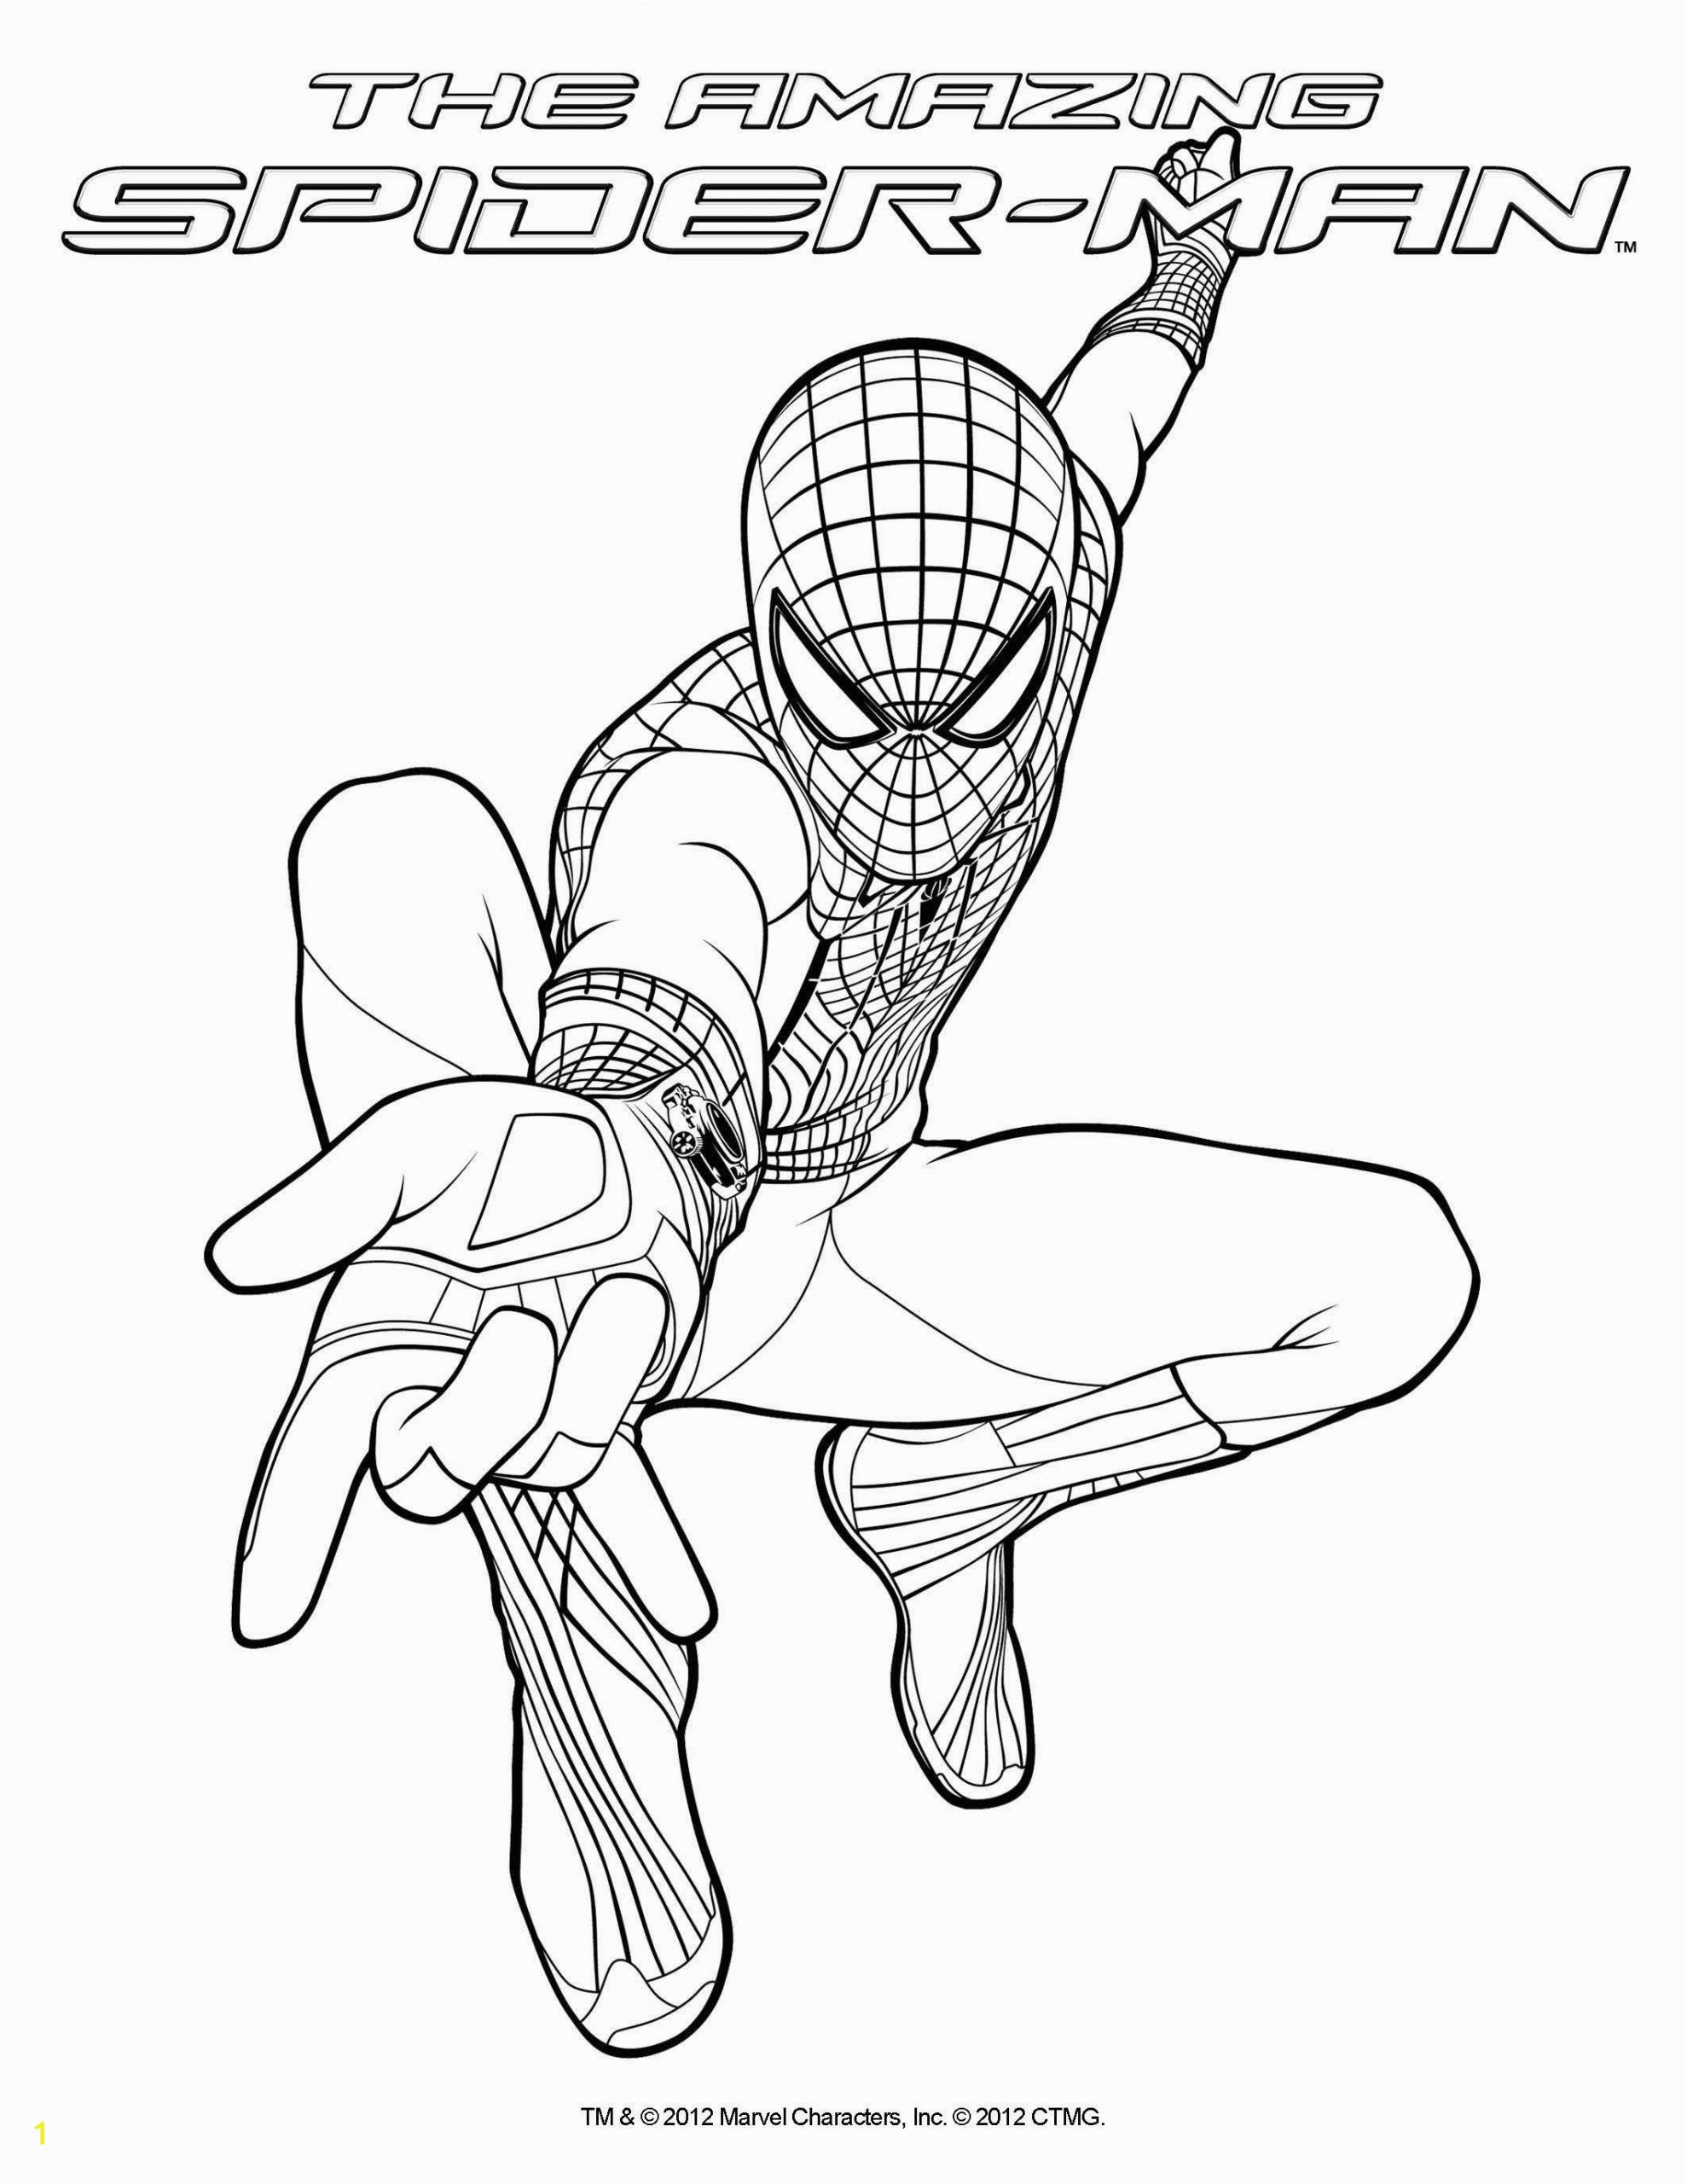 Spiderman Coloring Book Download Pdf Amazing Spider Man 2012 with Images